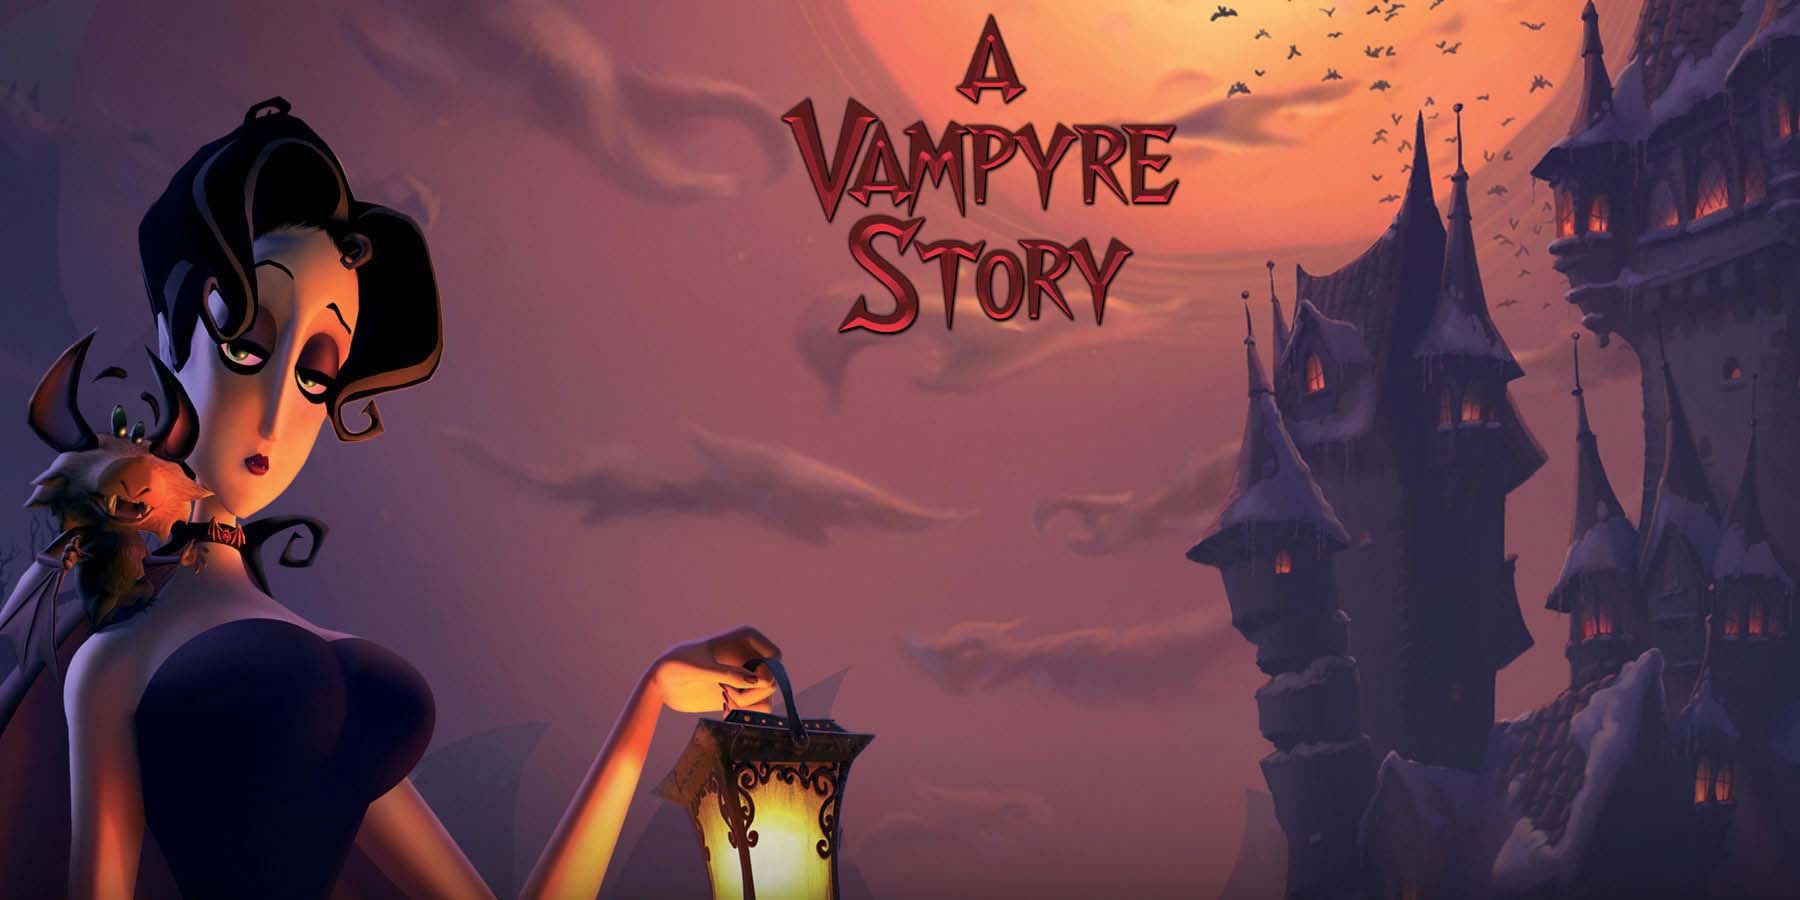 A Vampyre Story game